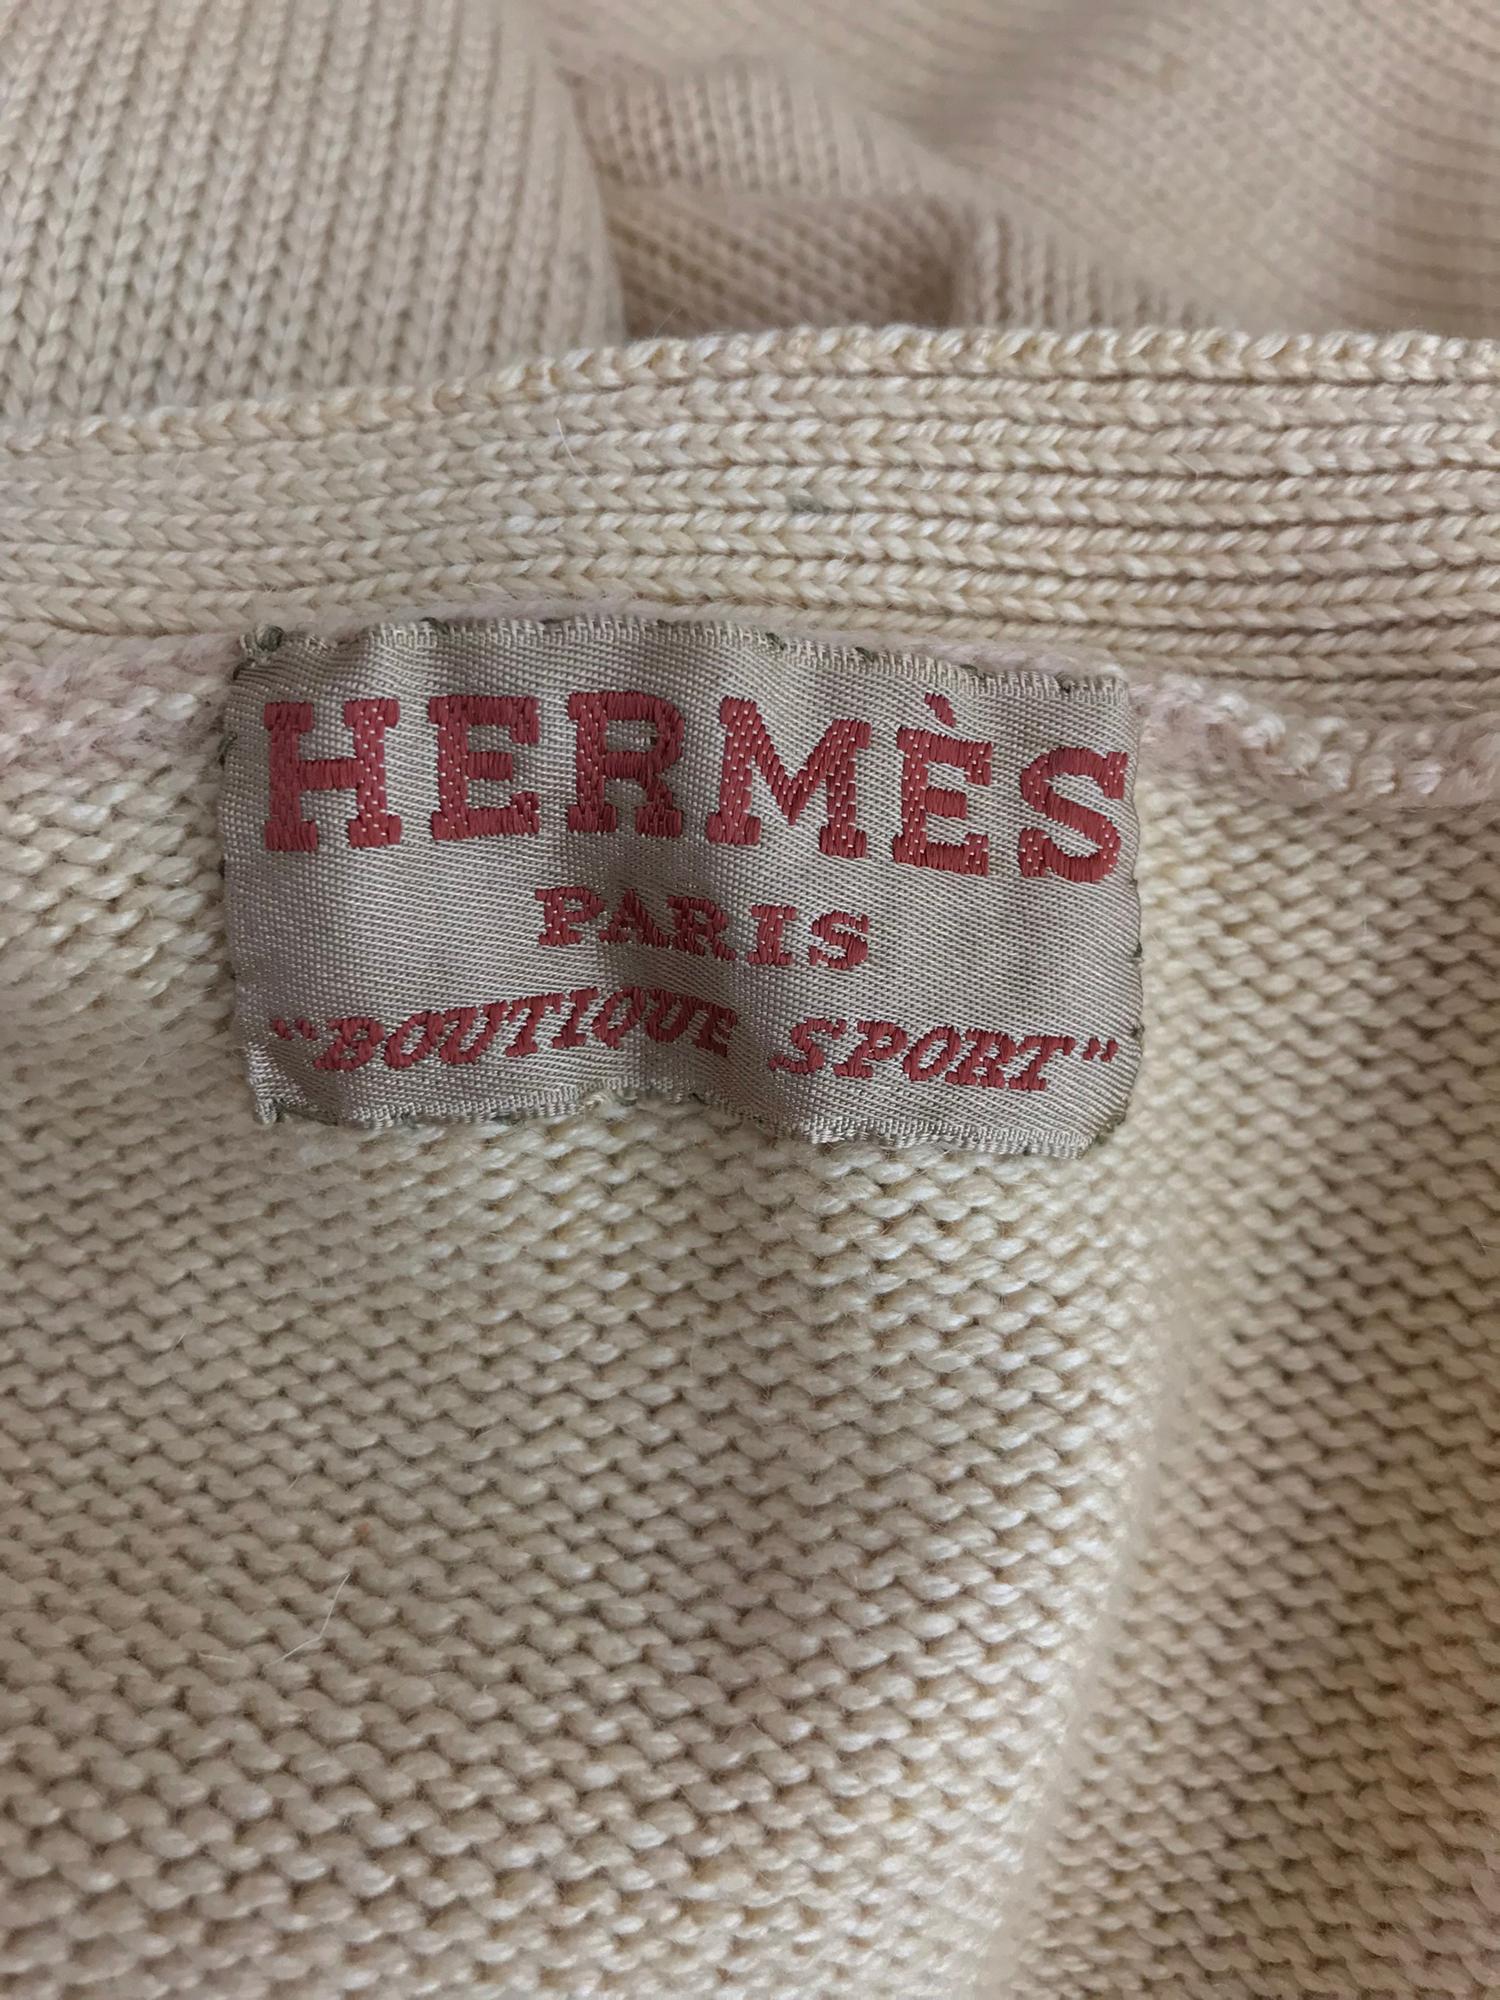 Hermes tan cashmere silk cable knit cardigan sweater 1960s For Sale 5